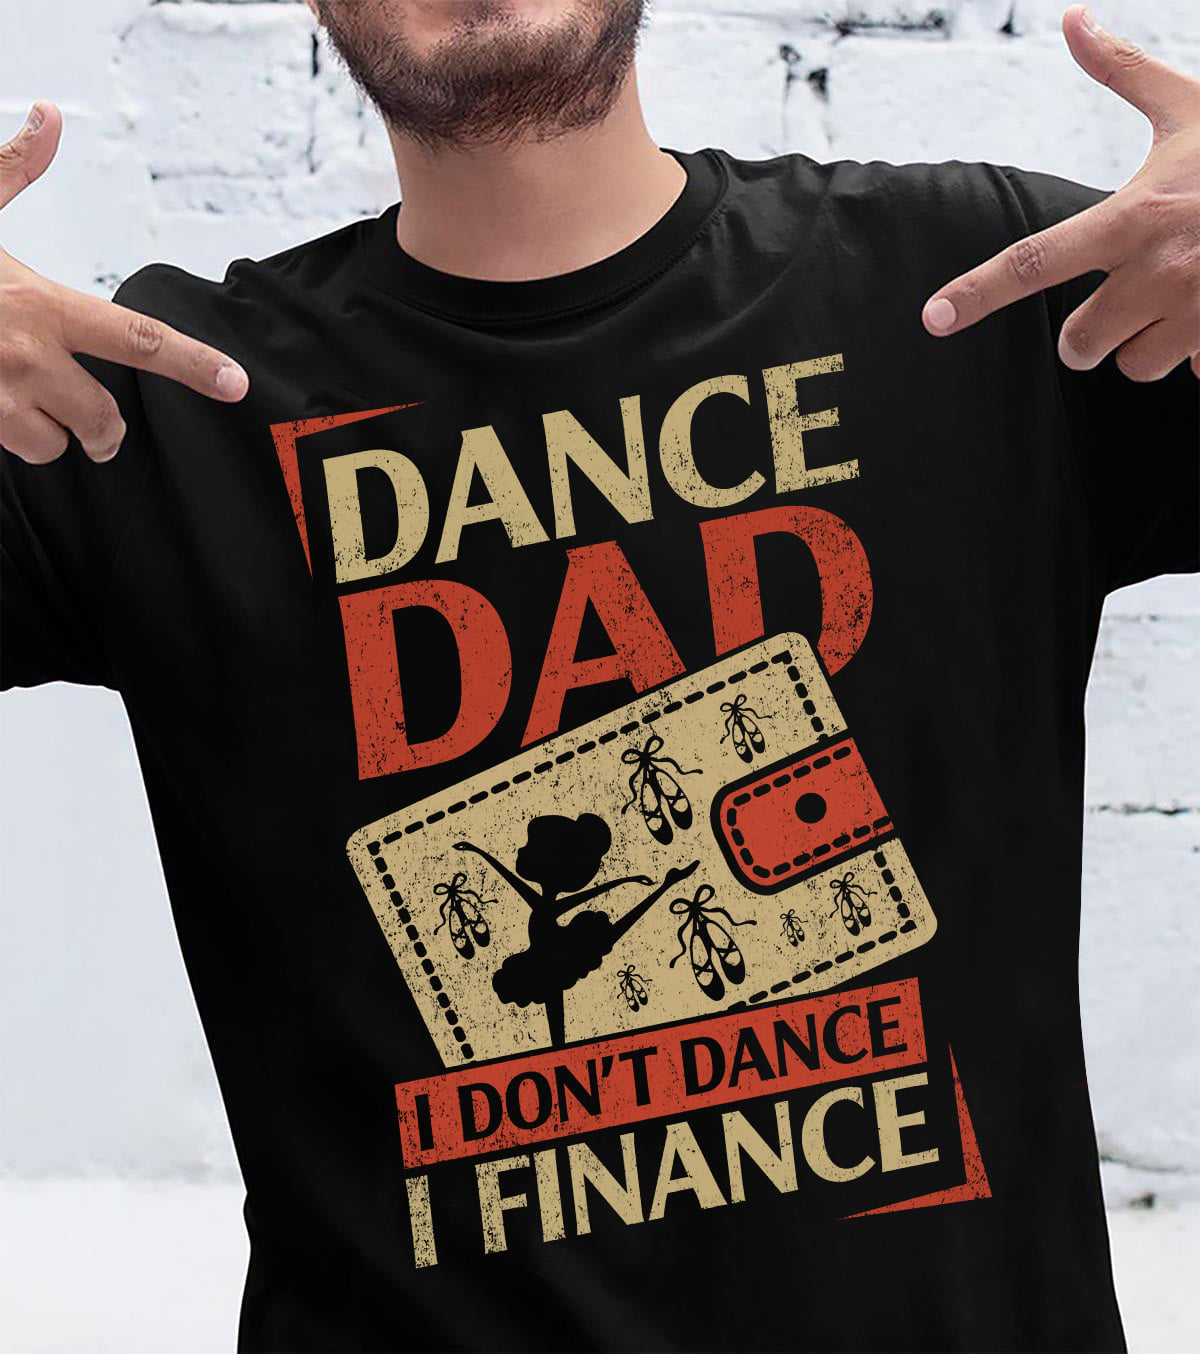 Dance dad I don't dance I finance - Father's day gift